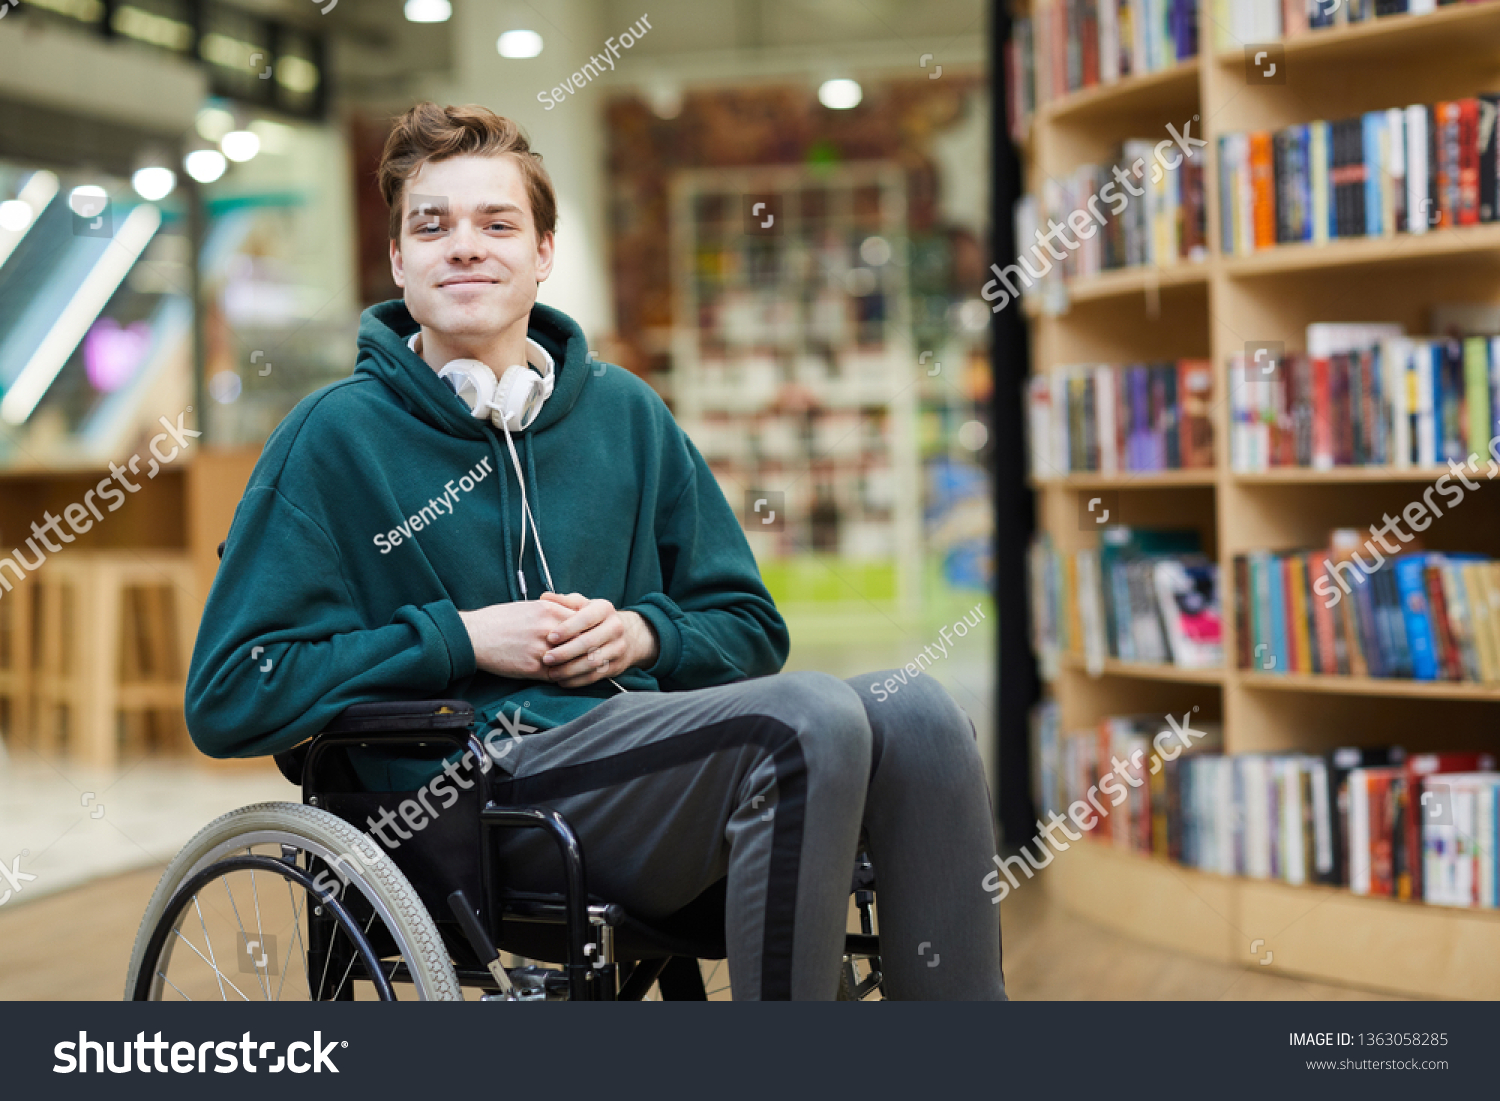 Content handsome young disabled student with headphones on neck siting in wheelchair and looking at camera in modern library or bookstore #1363058285